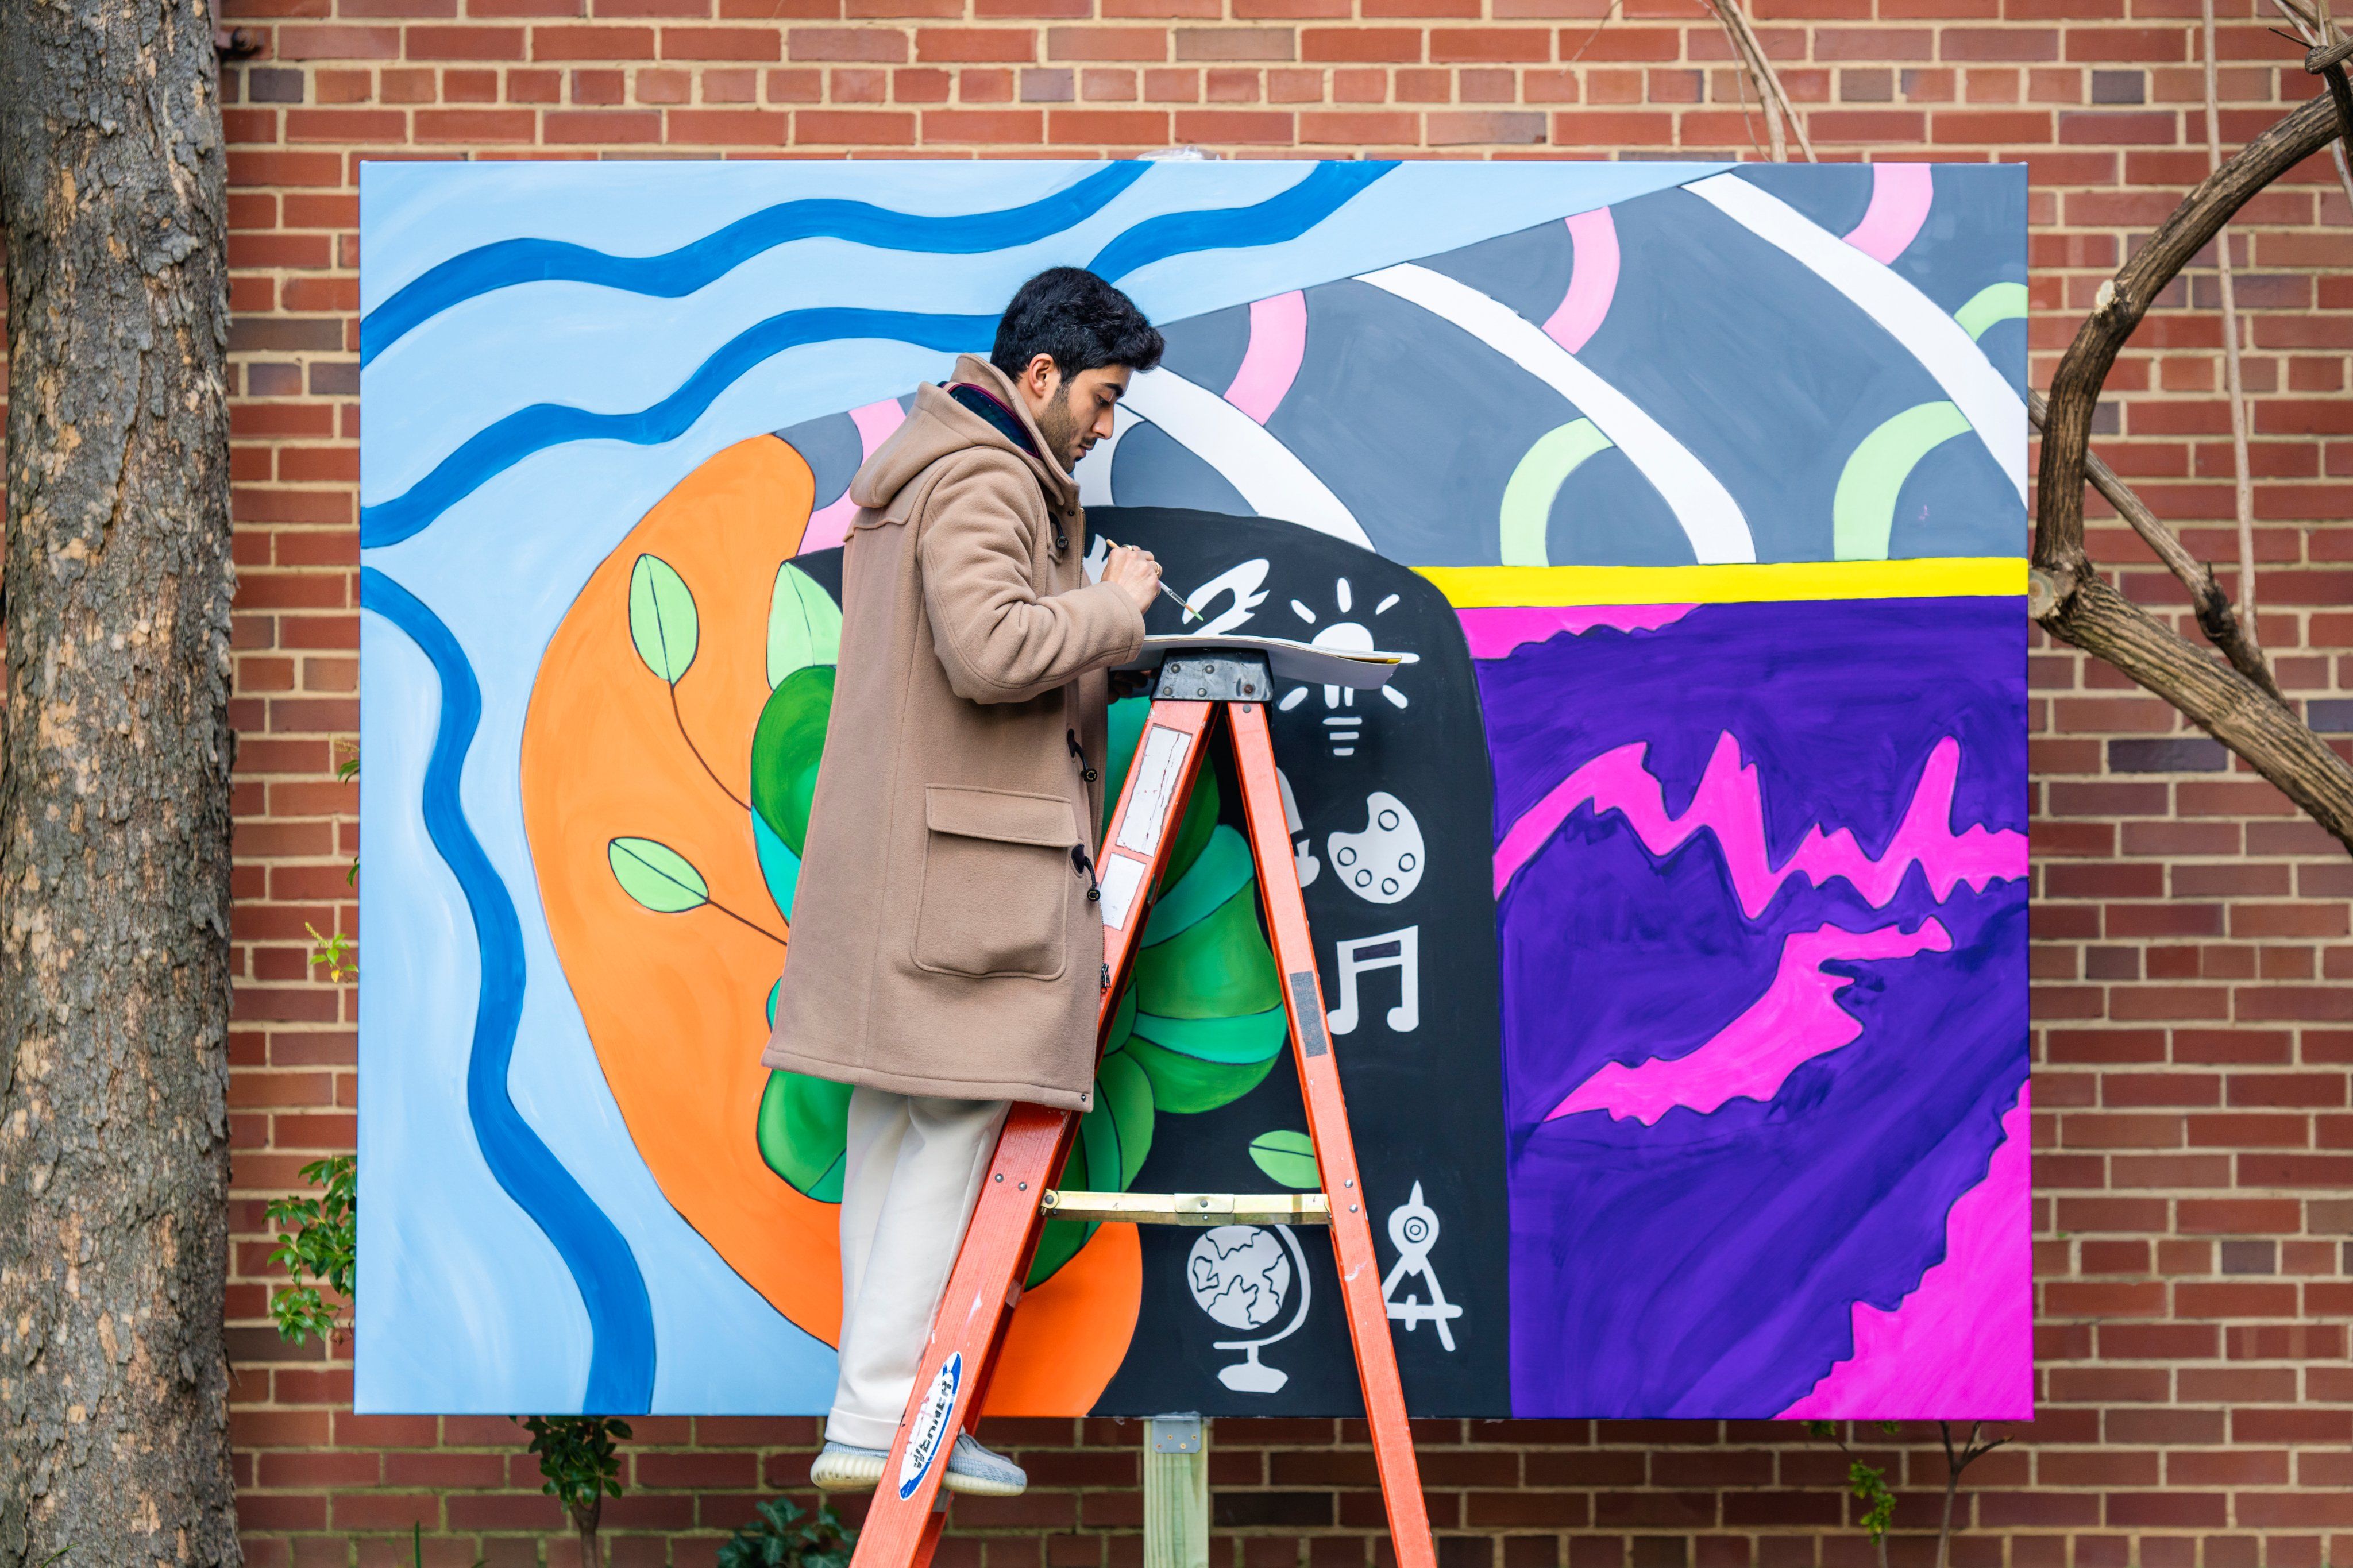 Qatari artist Ahmed Al Jufairi stands on a ladder in front of a red brick wall, painting a mural during JEDARIART in DC.